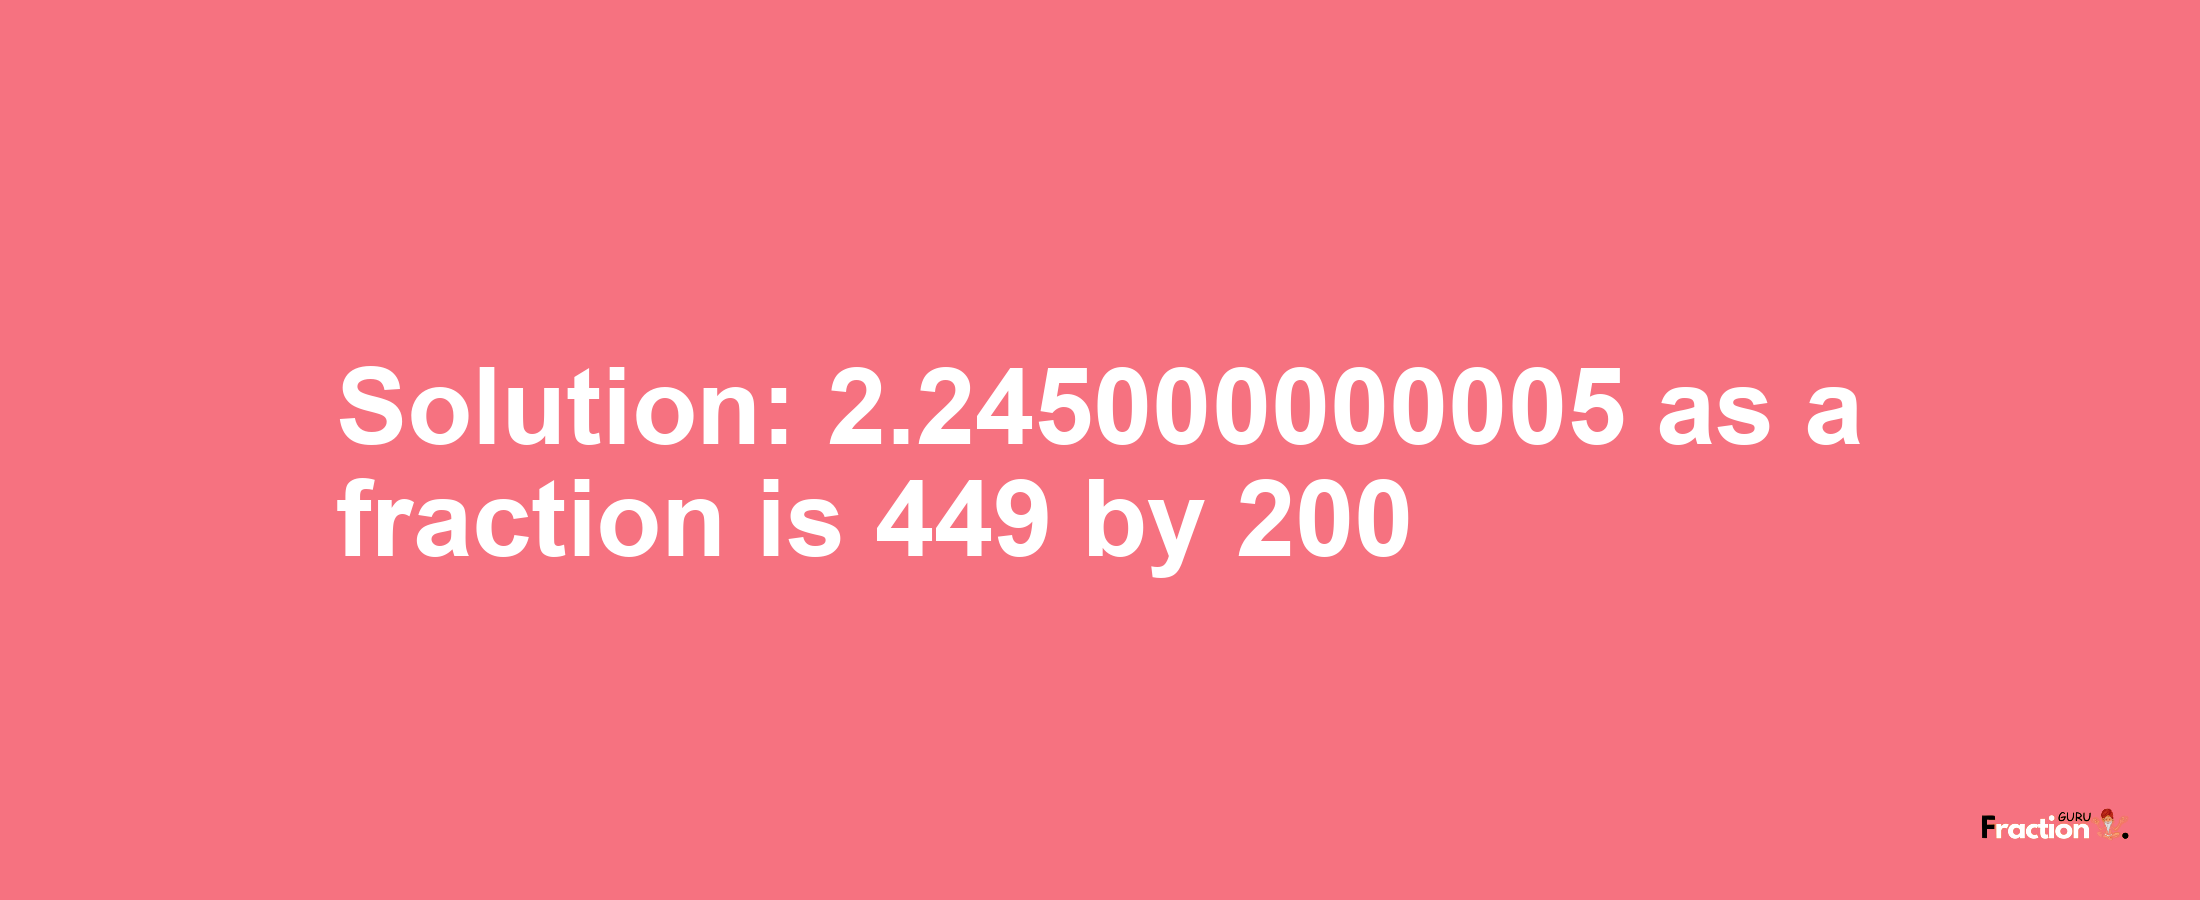 Solution:2.245000000005 as a fraction is 449/200